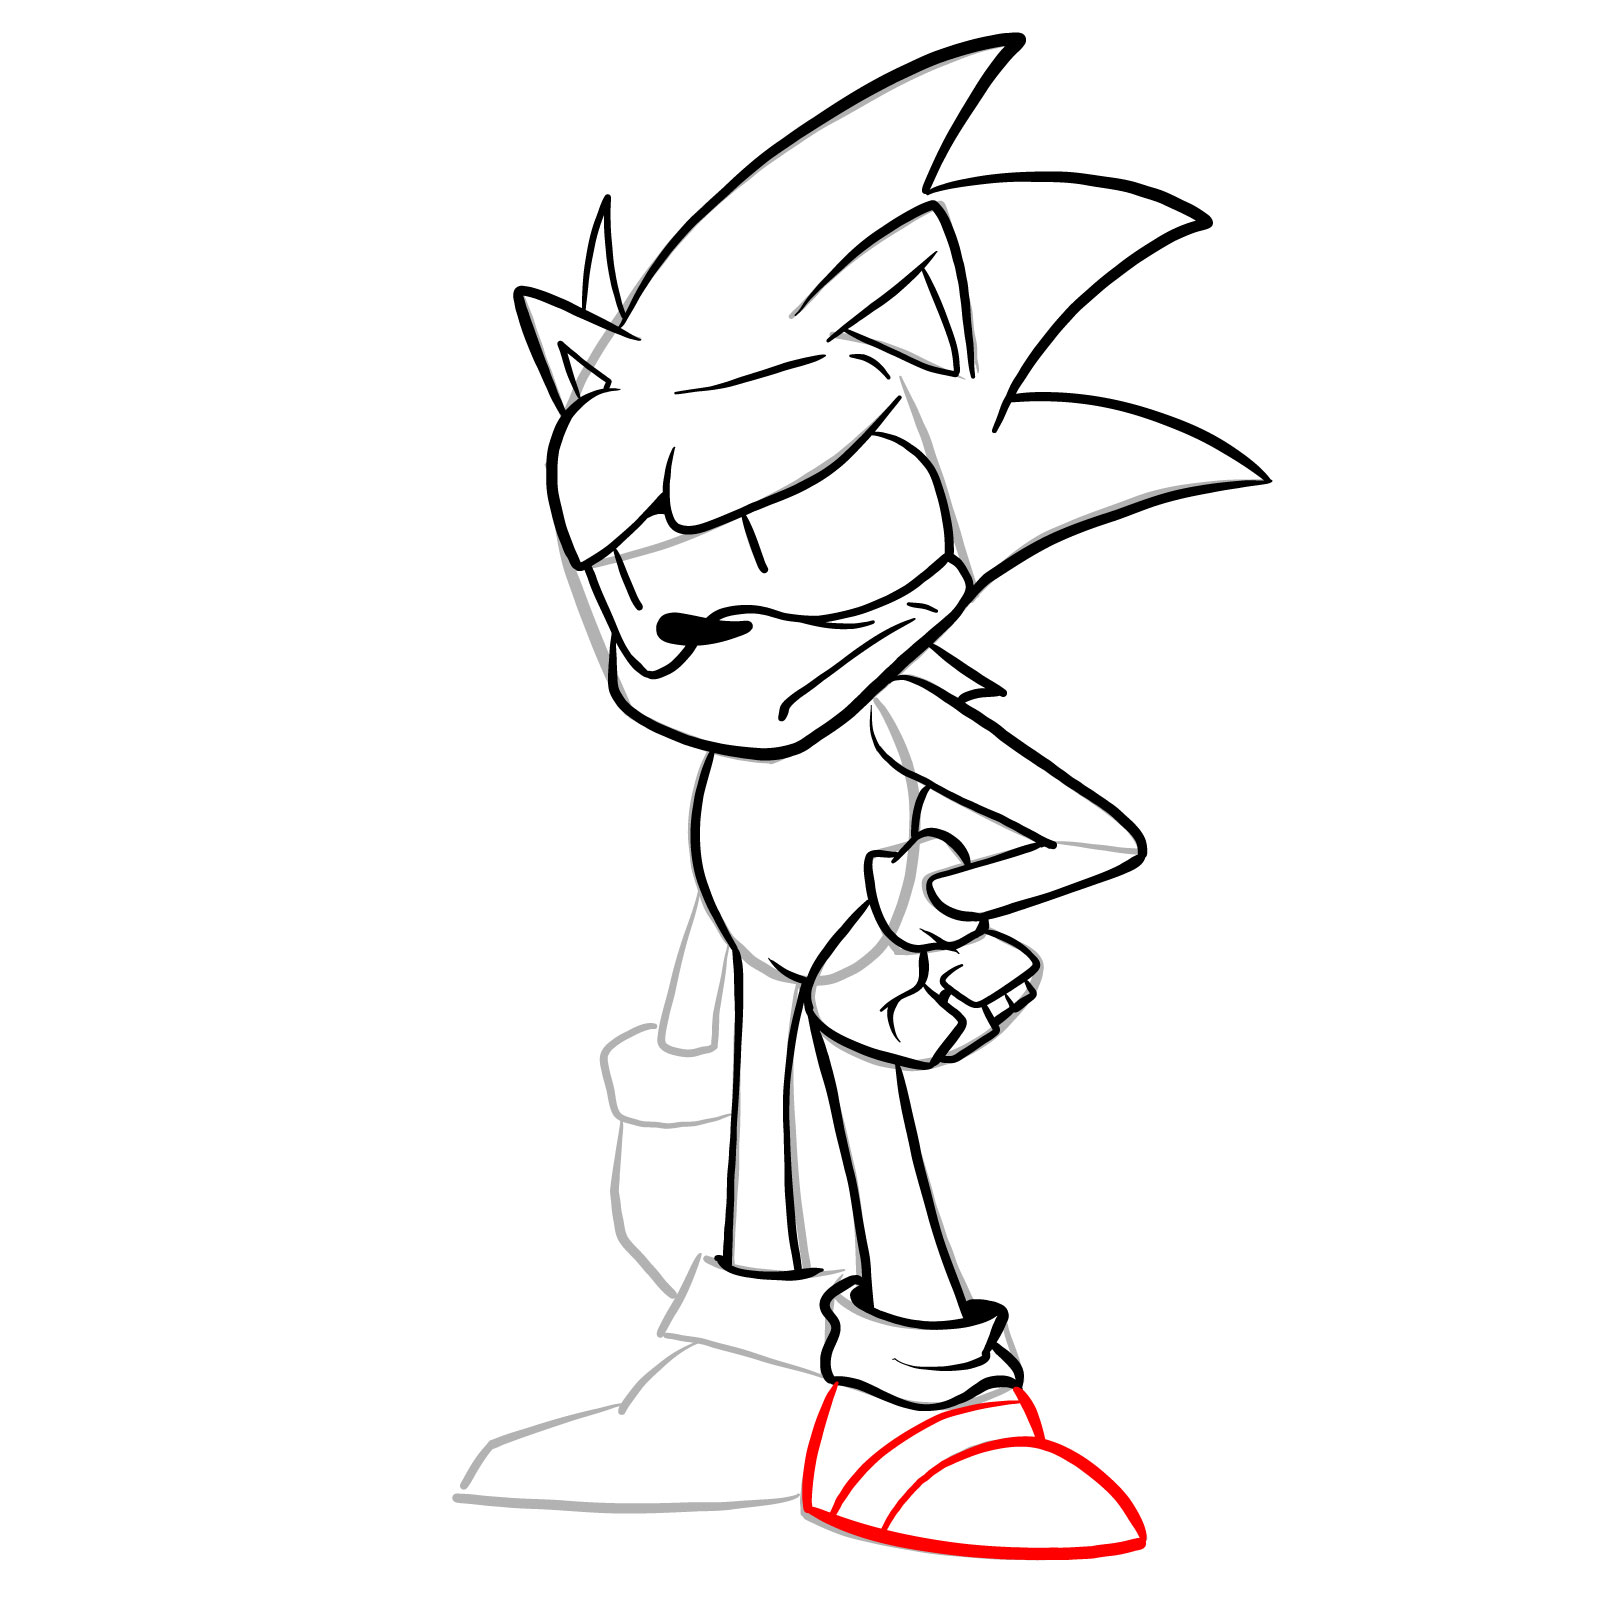 How to draw Sonic - FNF: Secret Histories - step 22